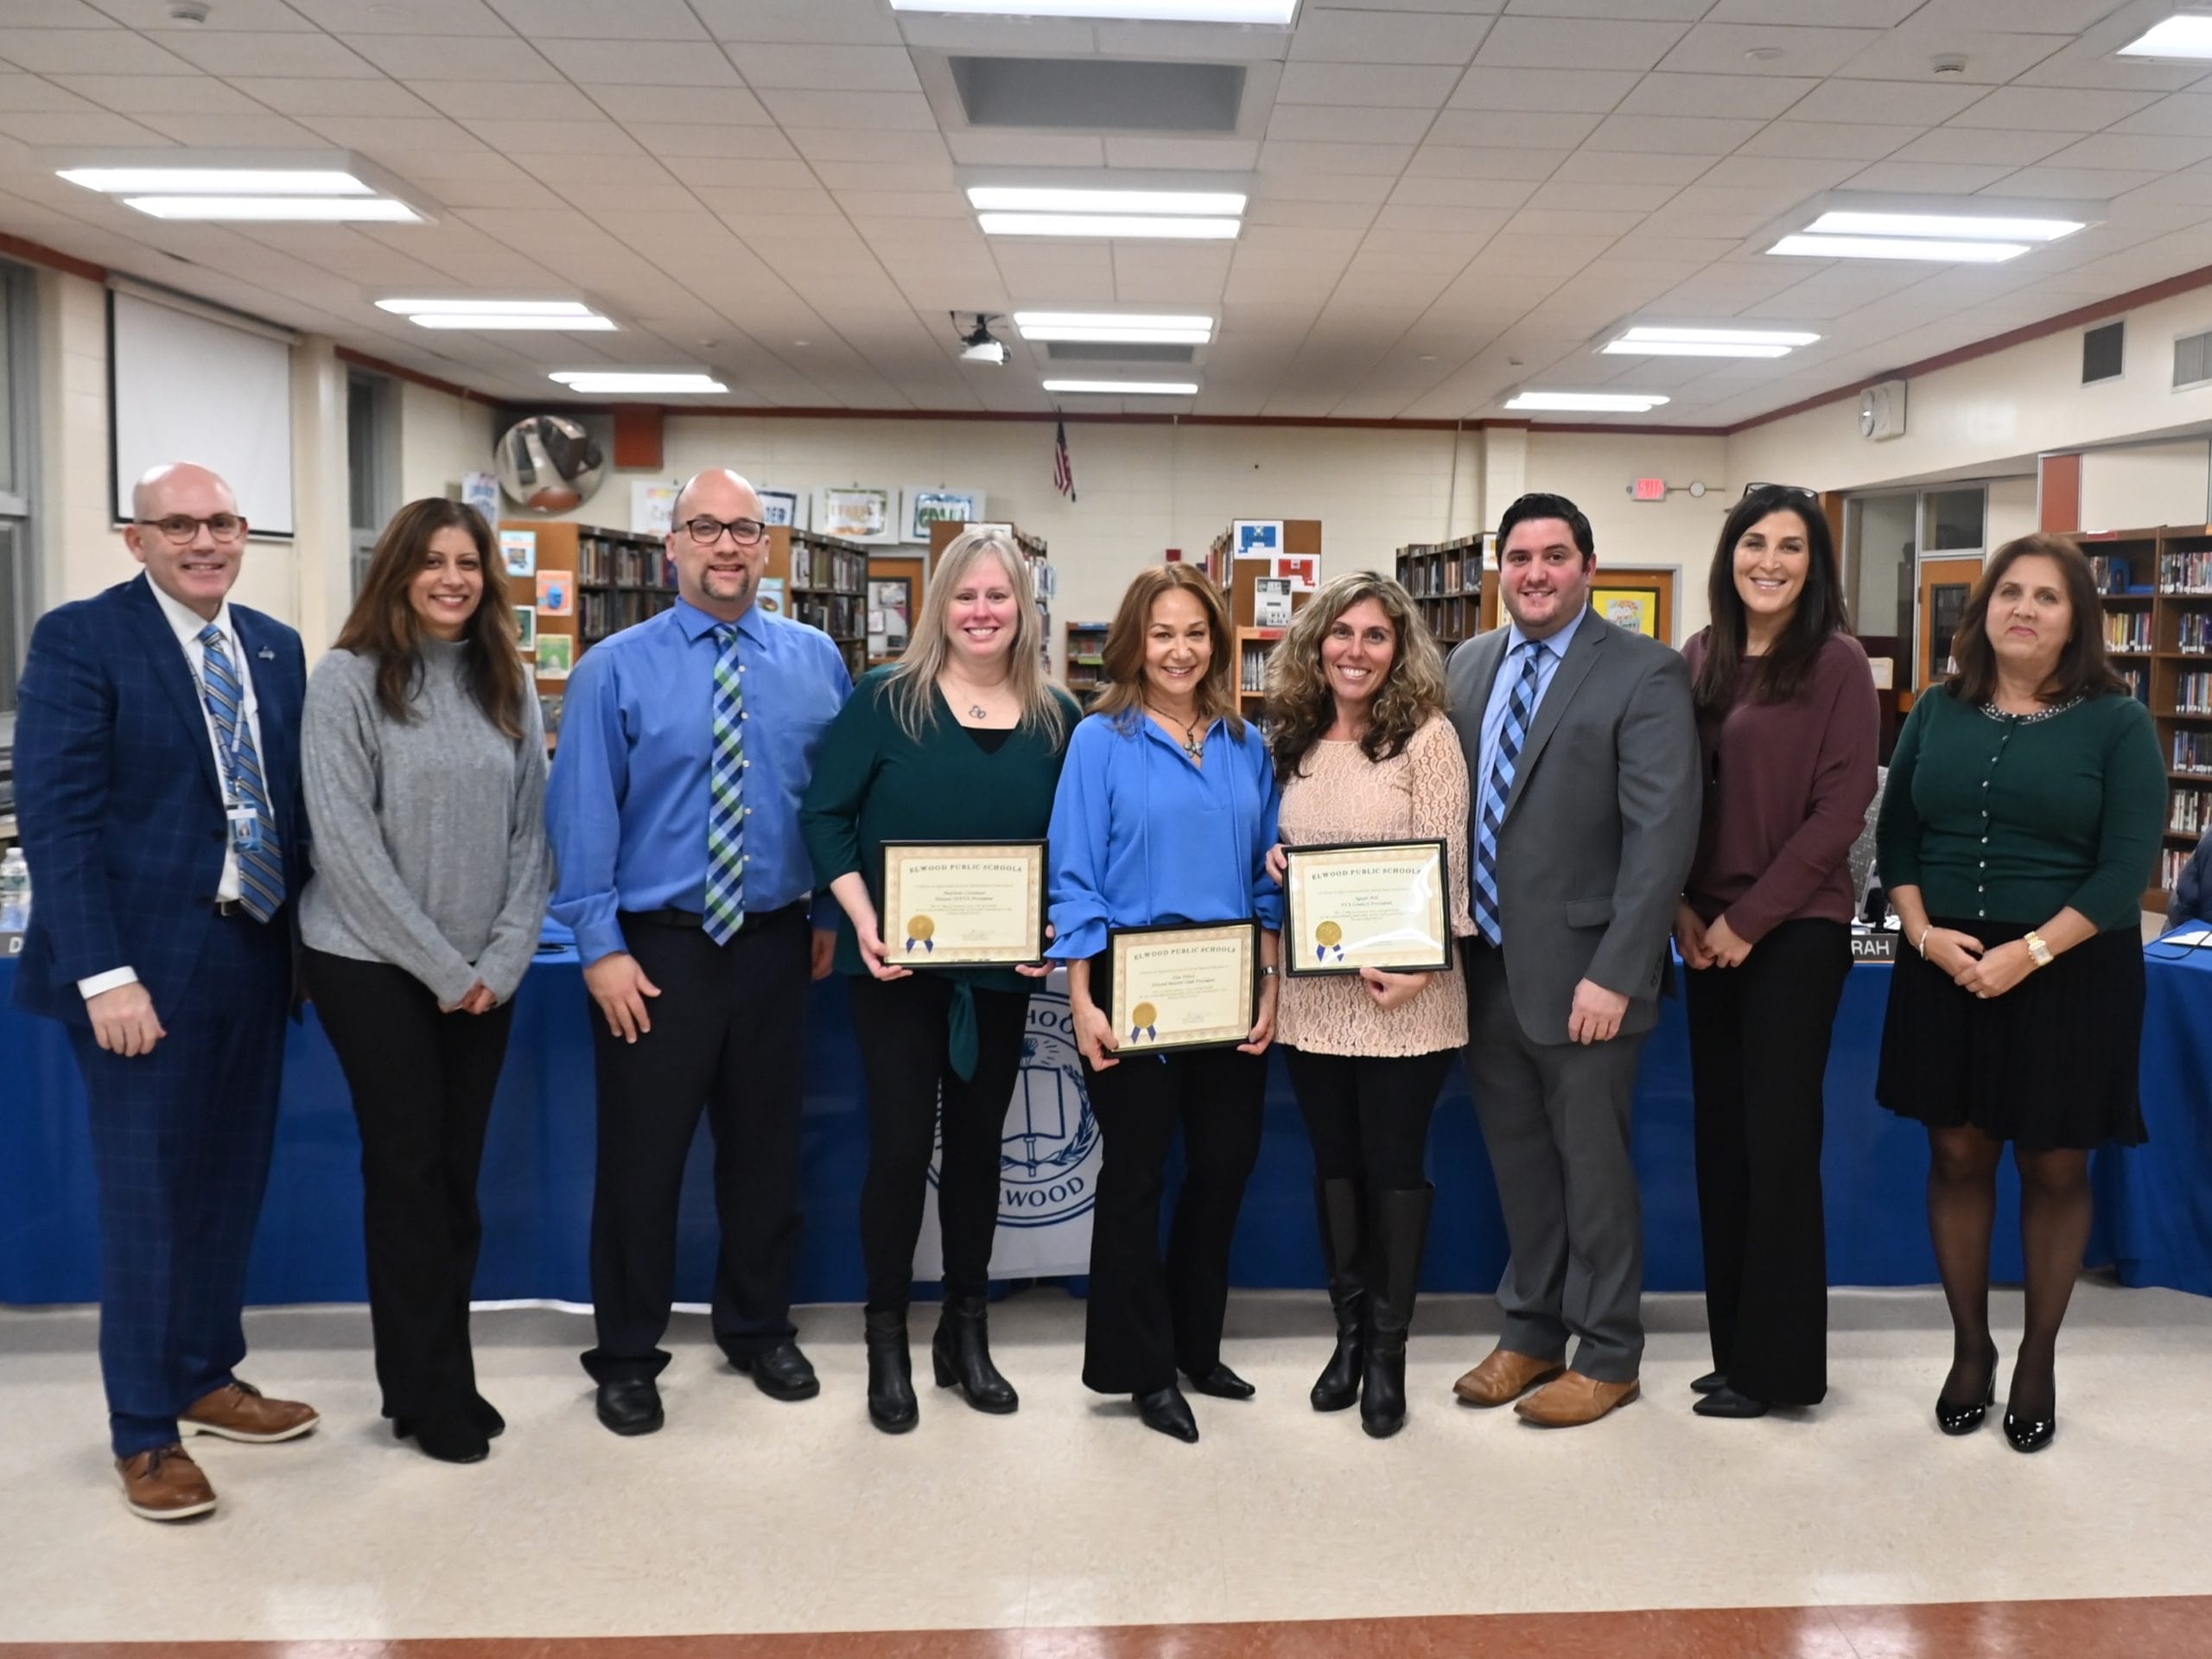 Elwood Board Of Education Honors Assemblyman Stern, PTA Reflections Winners And Parent Groups